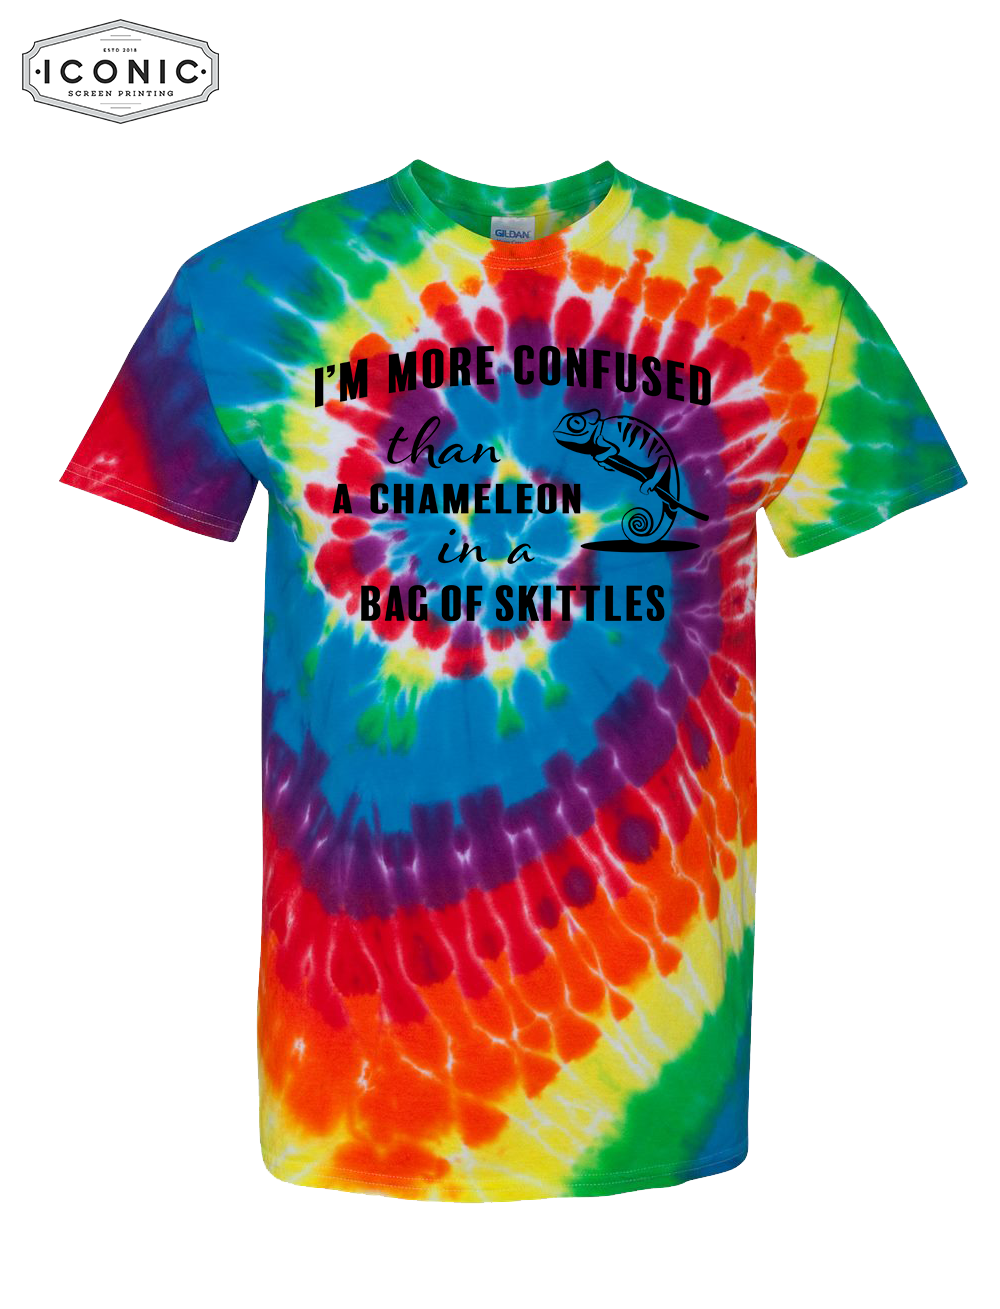 Confused Chameleon - Multi-Color Spiral Tie-Dyed T-Shirt